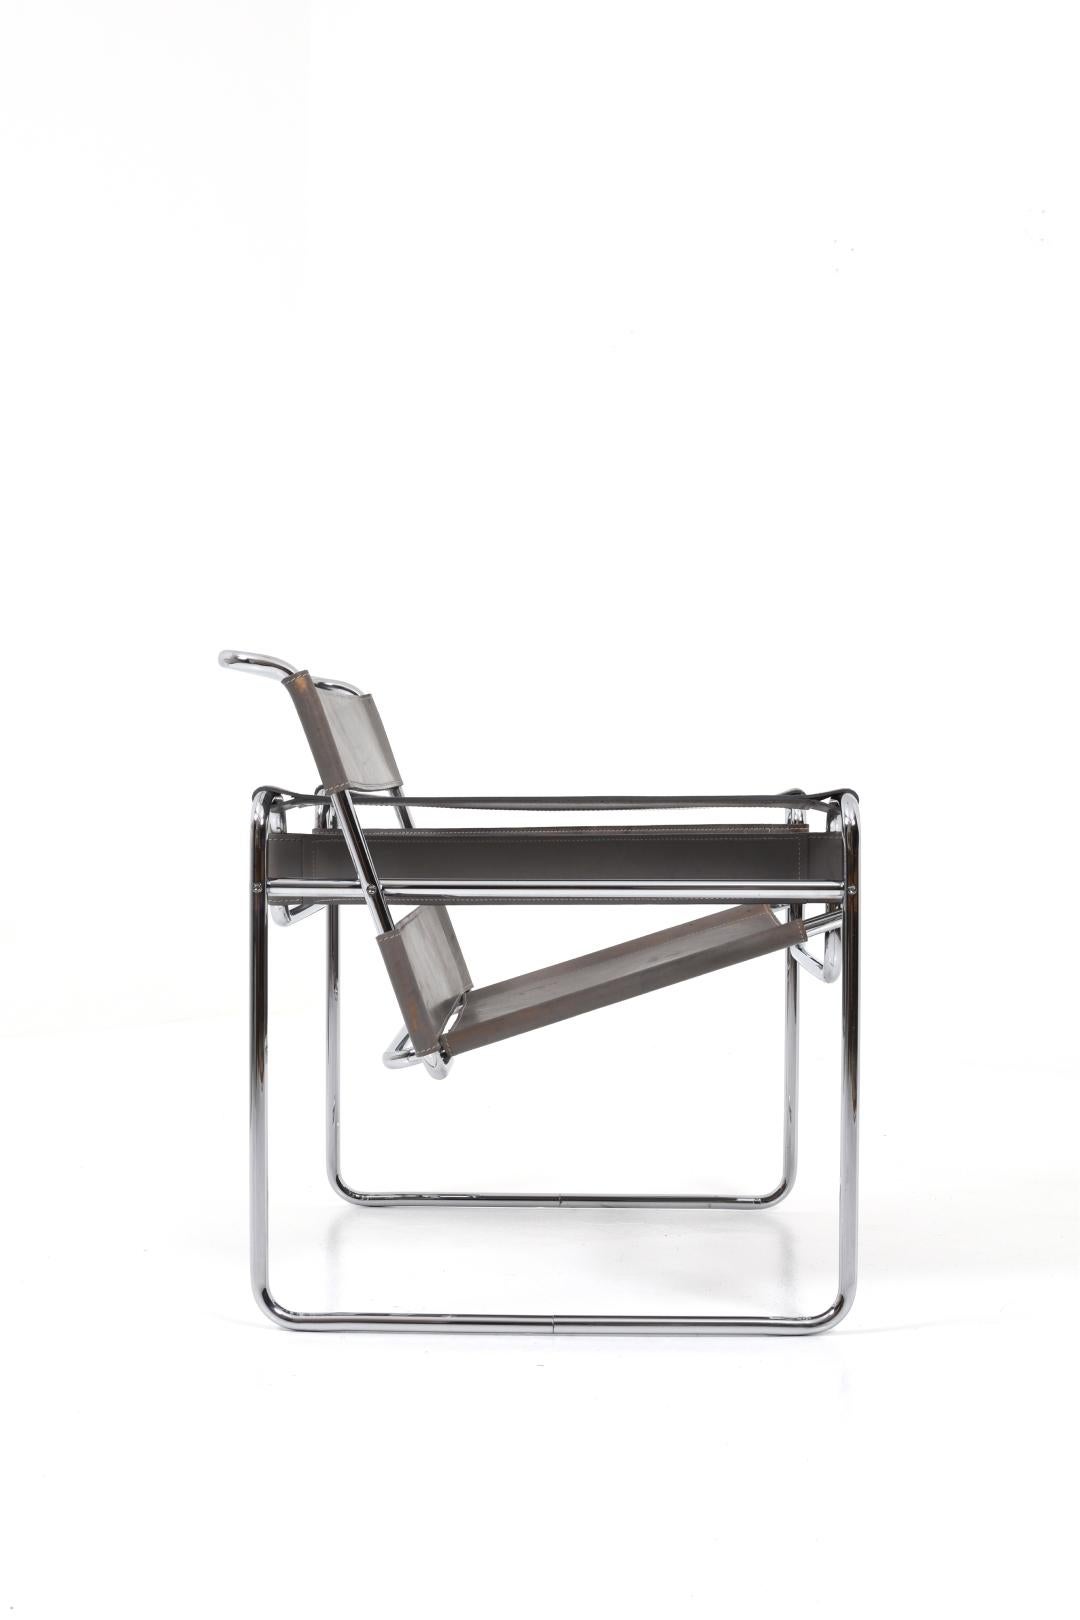 The Wassily Lounge Chair is a design icon by the famous architect Marcel Breuer that he designed in 1925.

The chair's frame is made of bent steel tubes, giving it a distinct and airy aesthetic. This timeless design choice means that the look of the